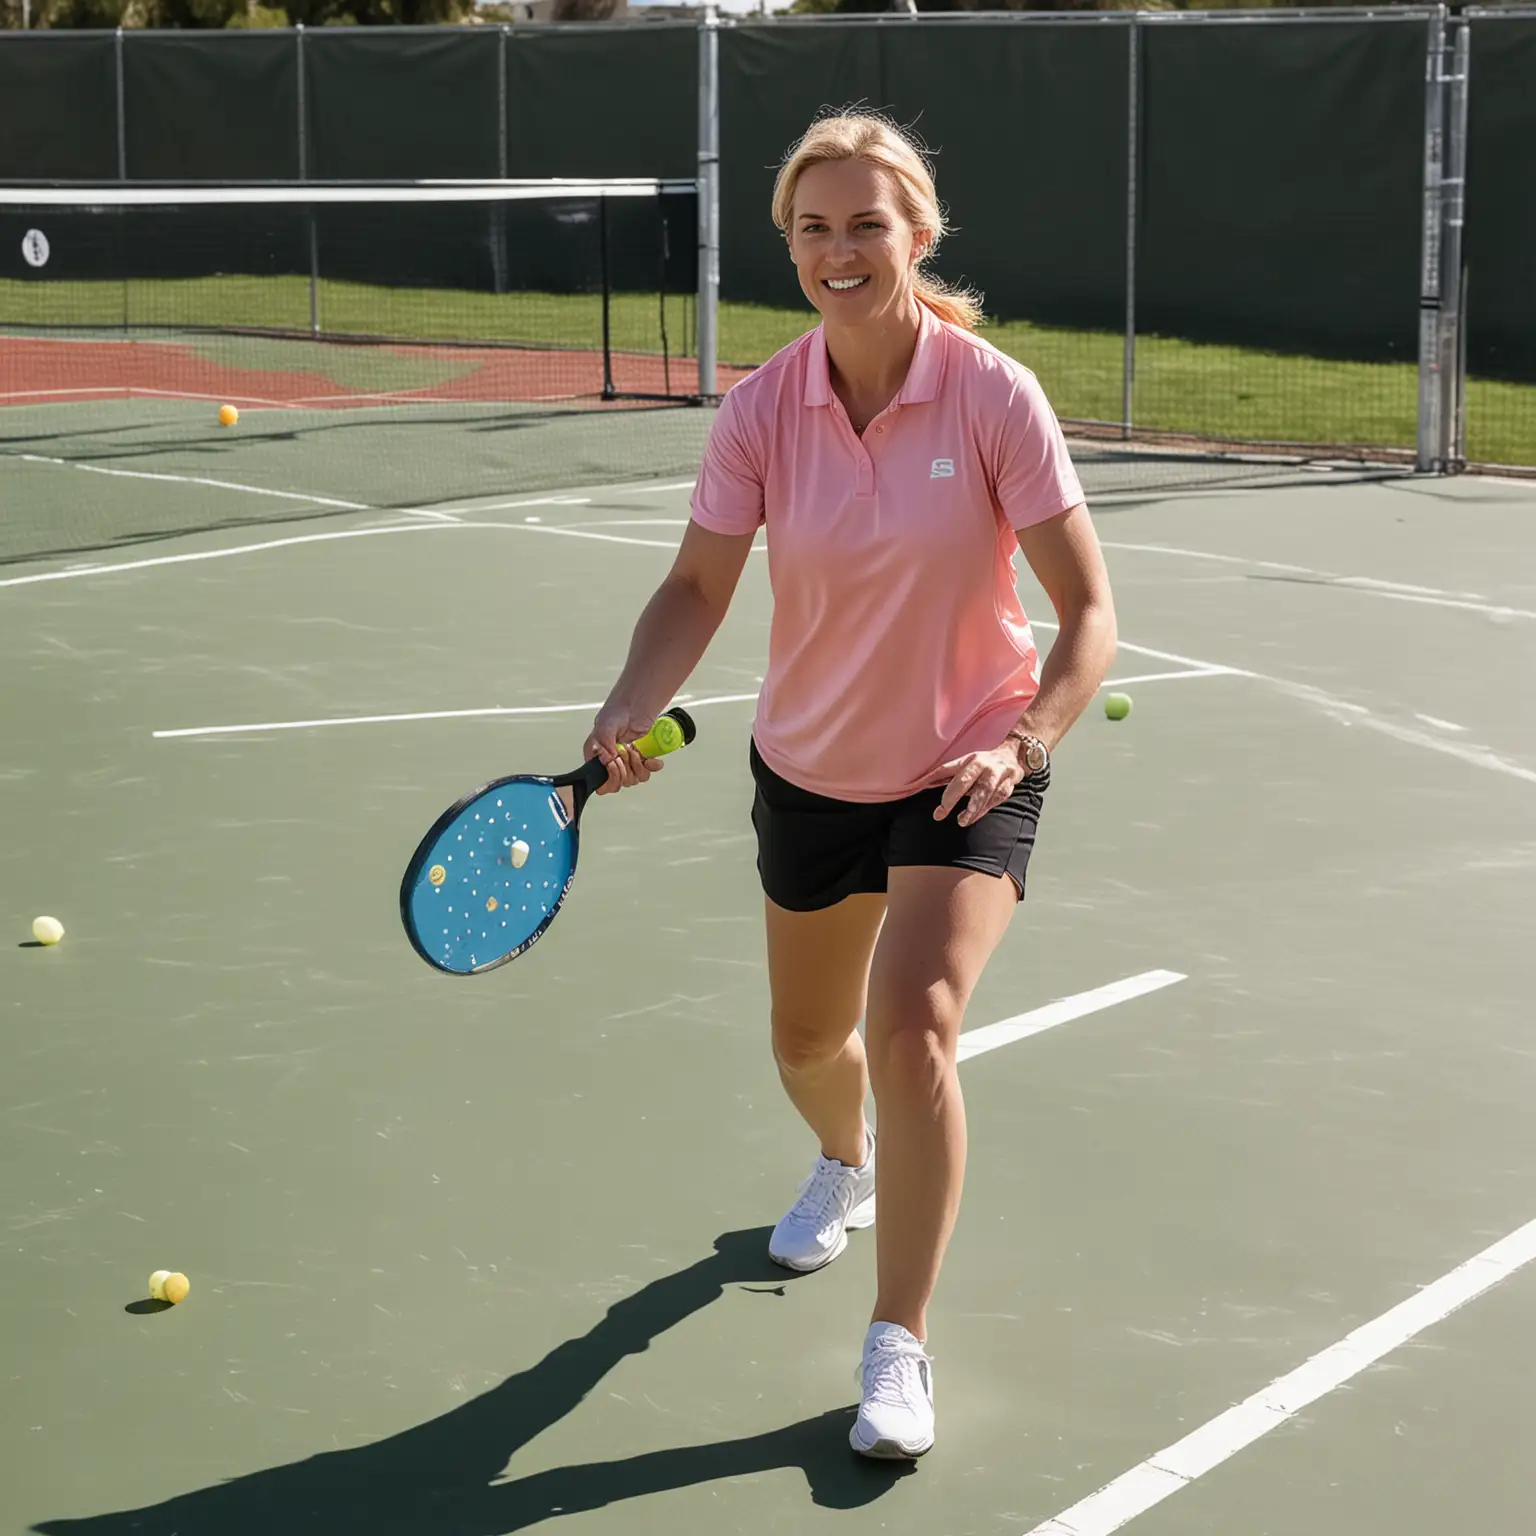 A WHITE WOMAN PLAYING PICKLEBALL ON A PICKLEBALL COURT. 